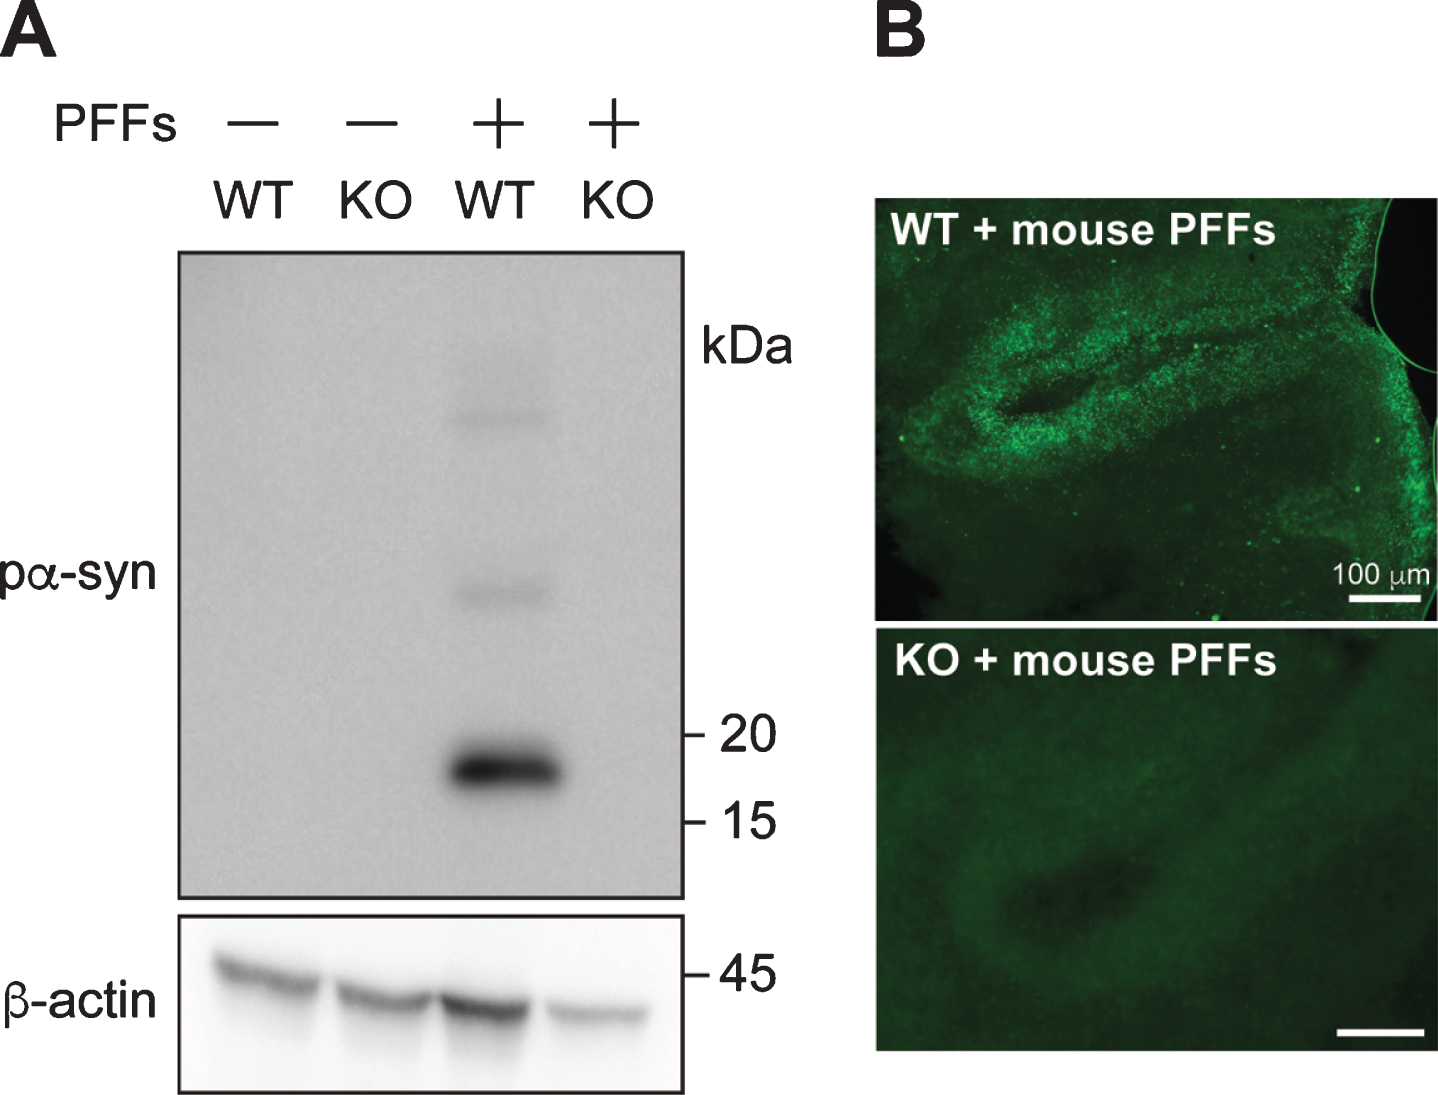 PFF-induced pα-syn is derived from endogenous α-syn. A) Cerebellar slices from wild-type (WT) or α-syn knock-out (KO) mice were treated with or without PFFs for 4 weeks. The presence of pα-syn and β-actin were detected by immunoblot analyses. B) Immunofluorescence staining of pα-syn in wild-type (WT) or α-syn knock-out (KO) cerebellar slices treated with mouse PFFs as indicated. Scale bar represents 100 μm.